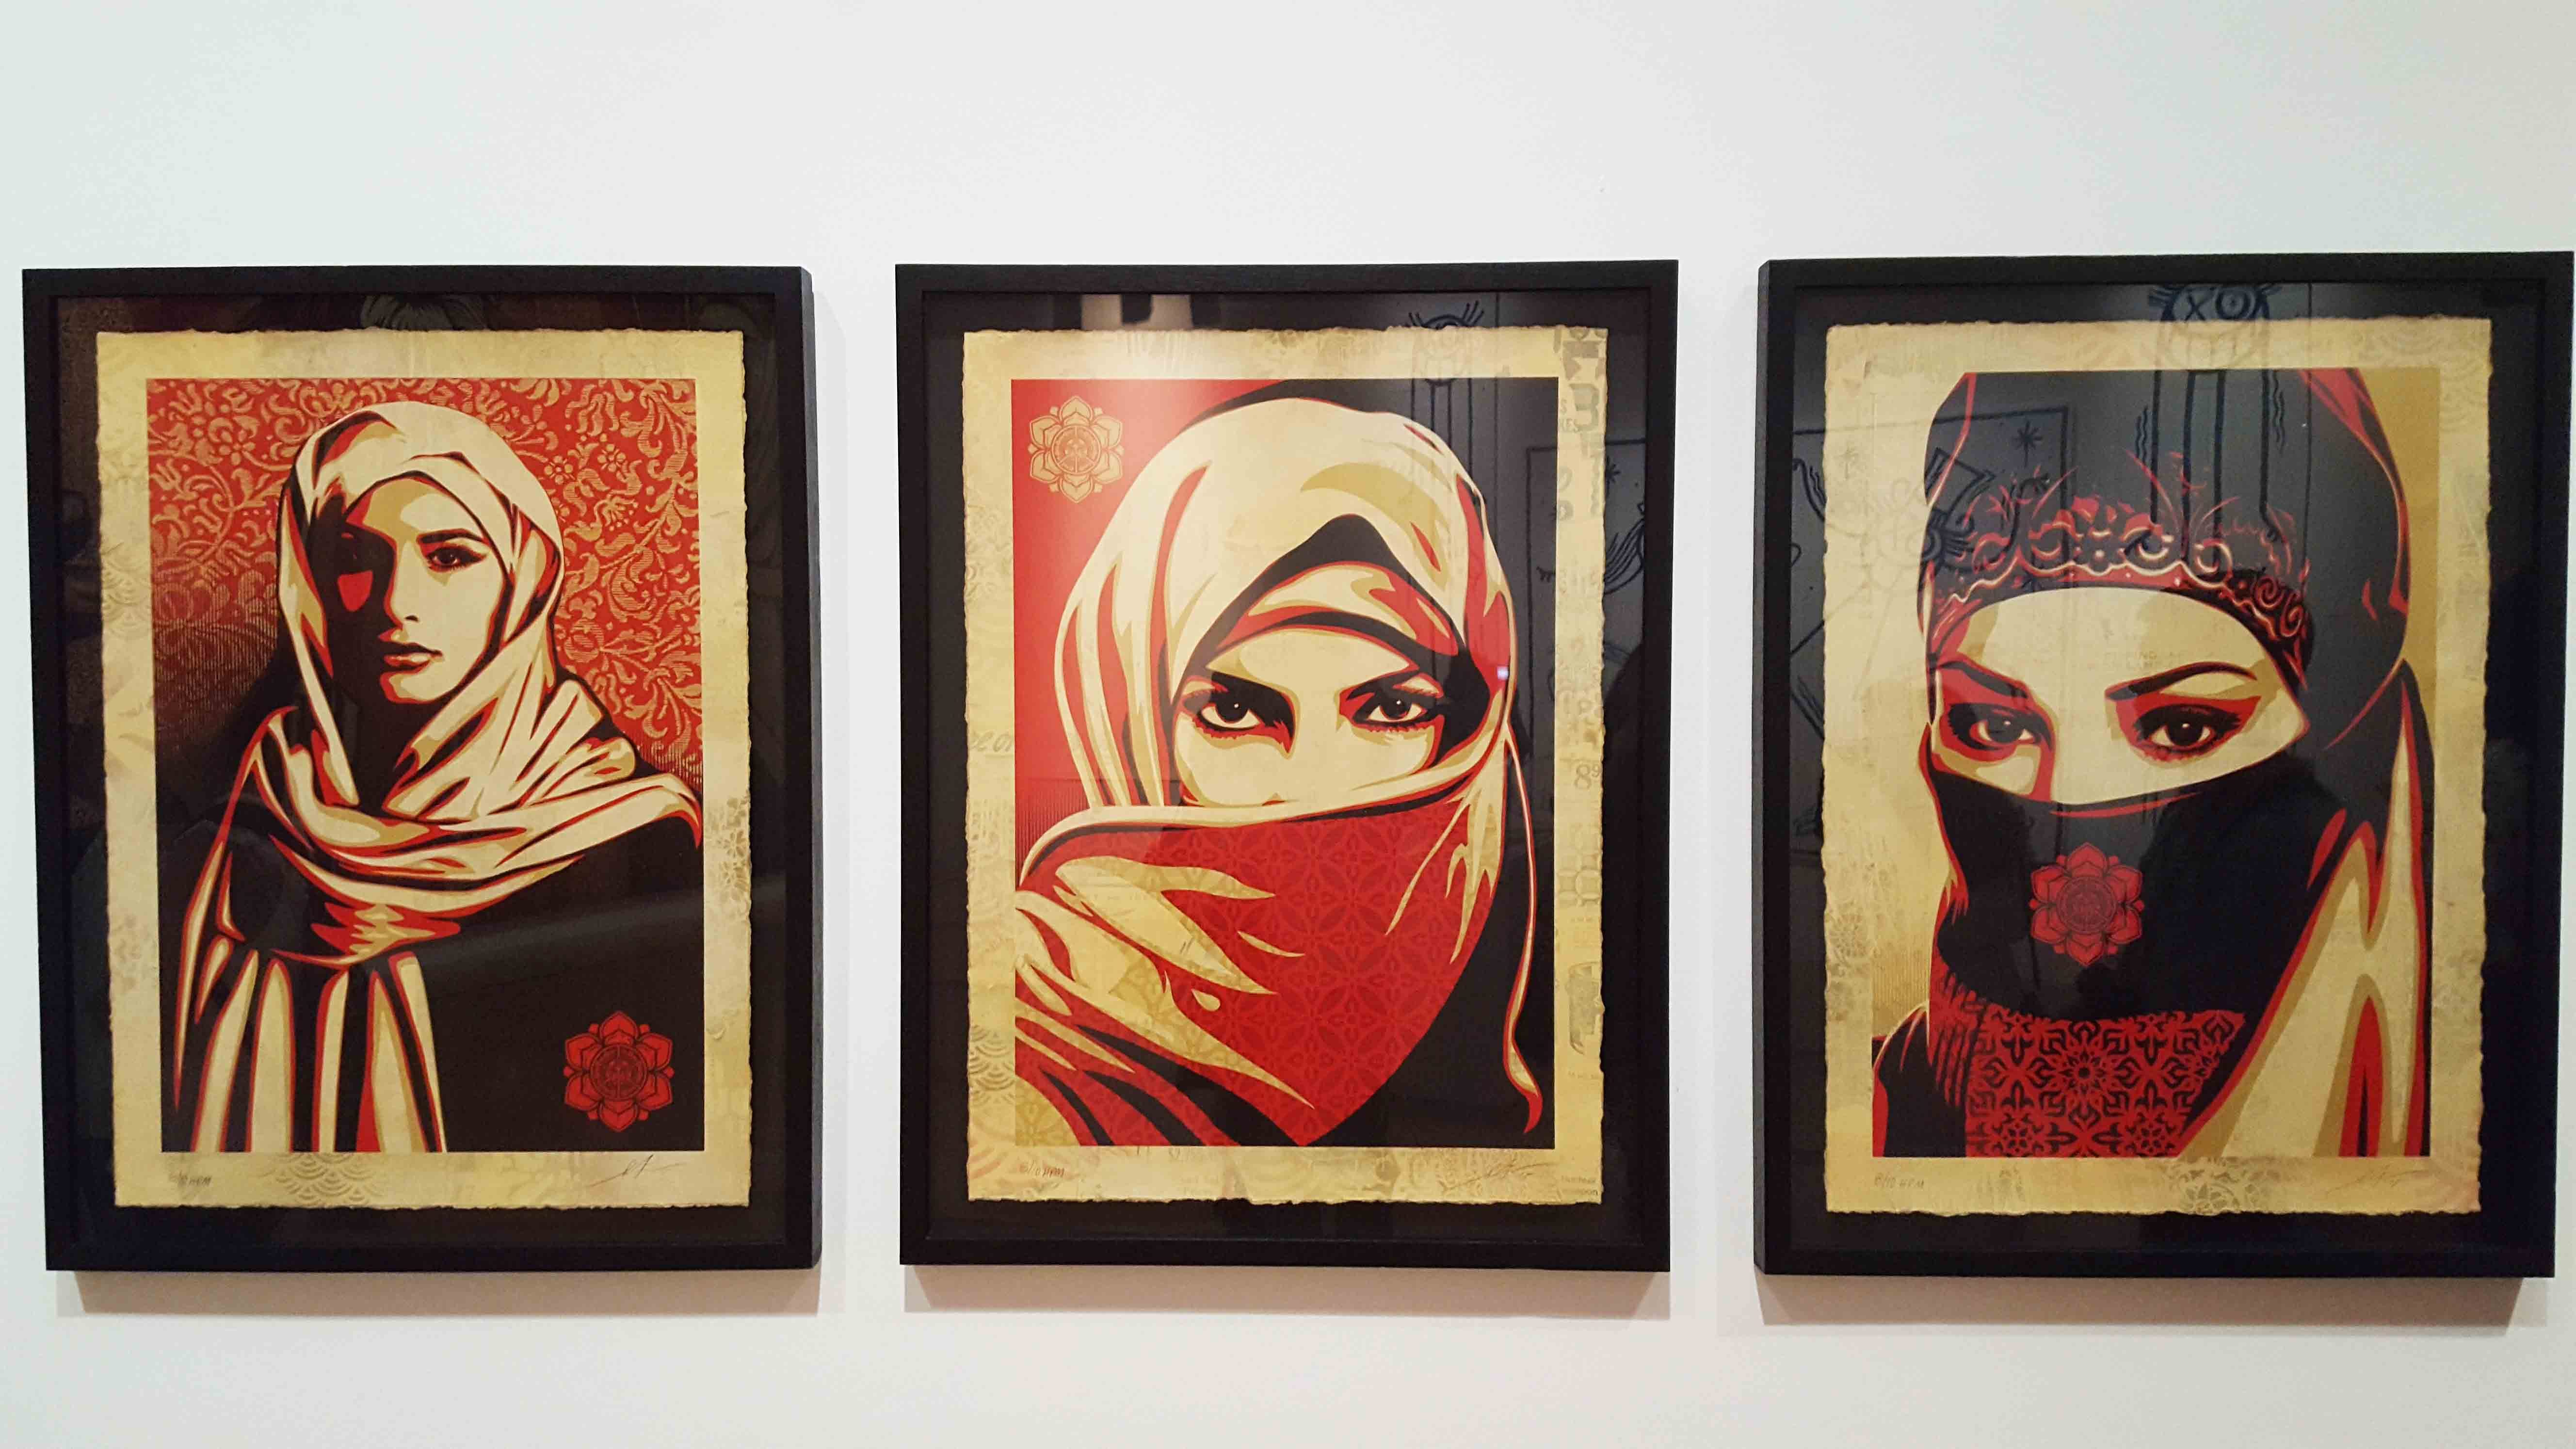 Works from the Your Eyes Here Series of Shepard Fairey  